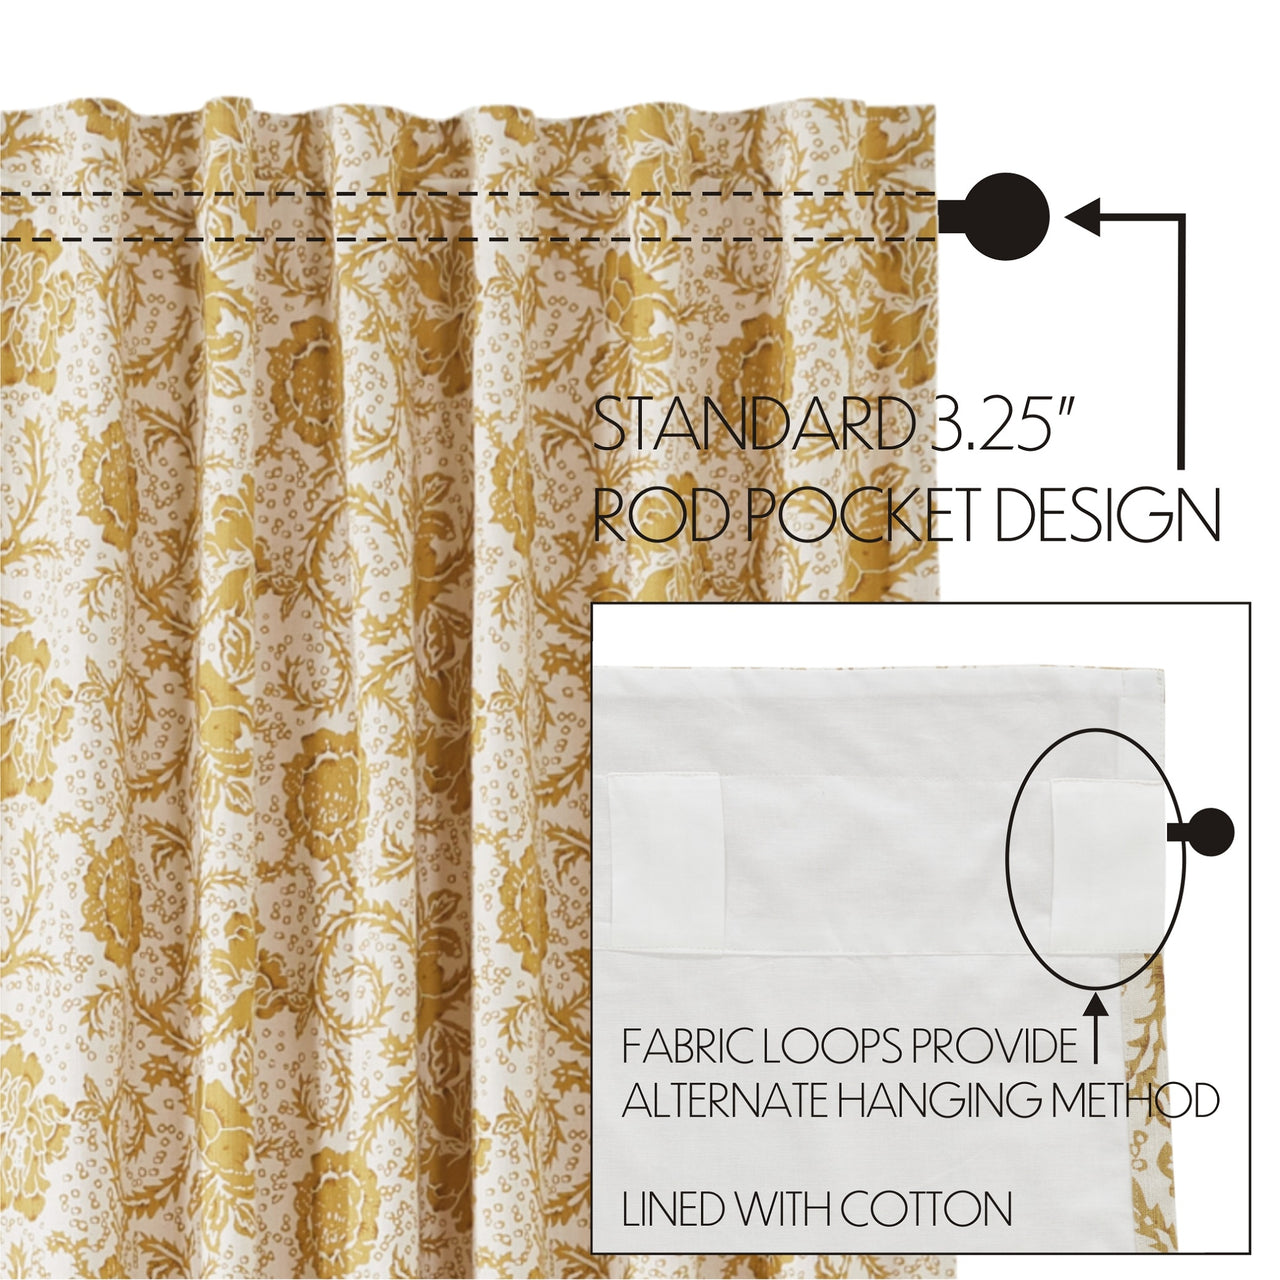 Dorset Gold Floral Panel Curtain Set of 2 84"x40" VHC Brands